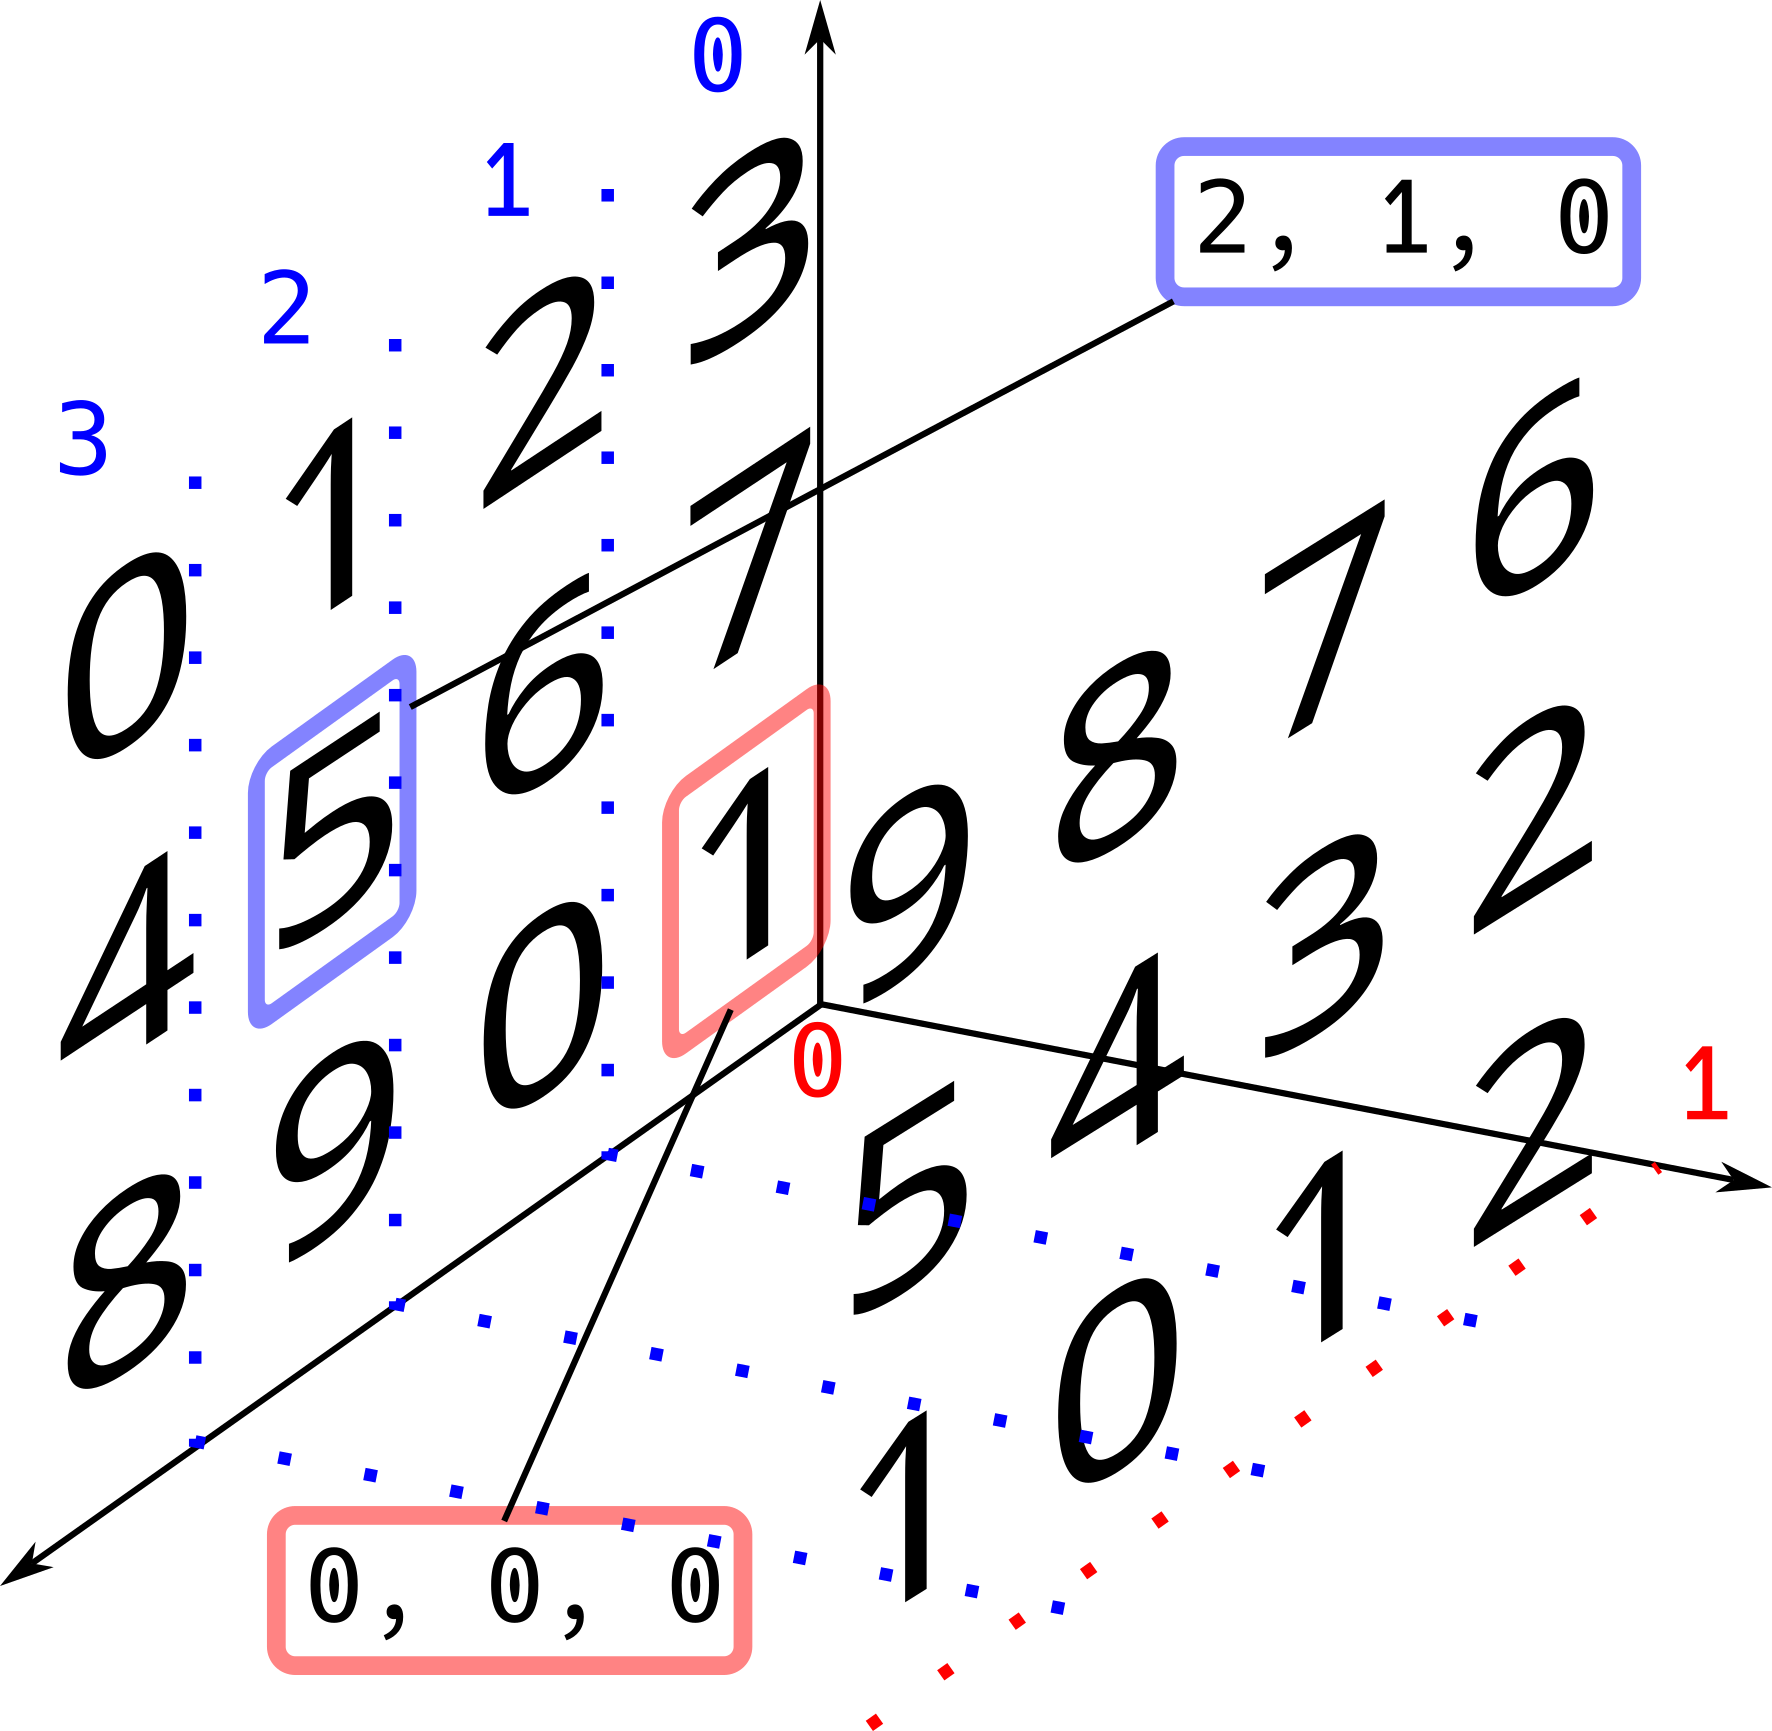 A 3D array with two 3x4 matrices extended along a thirddimension